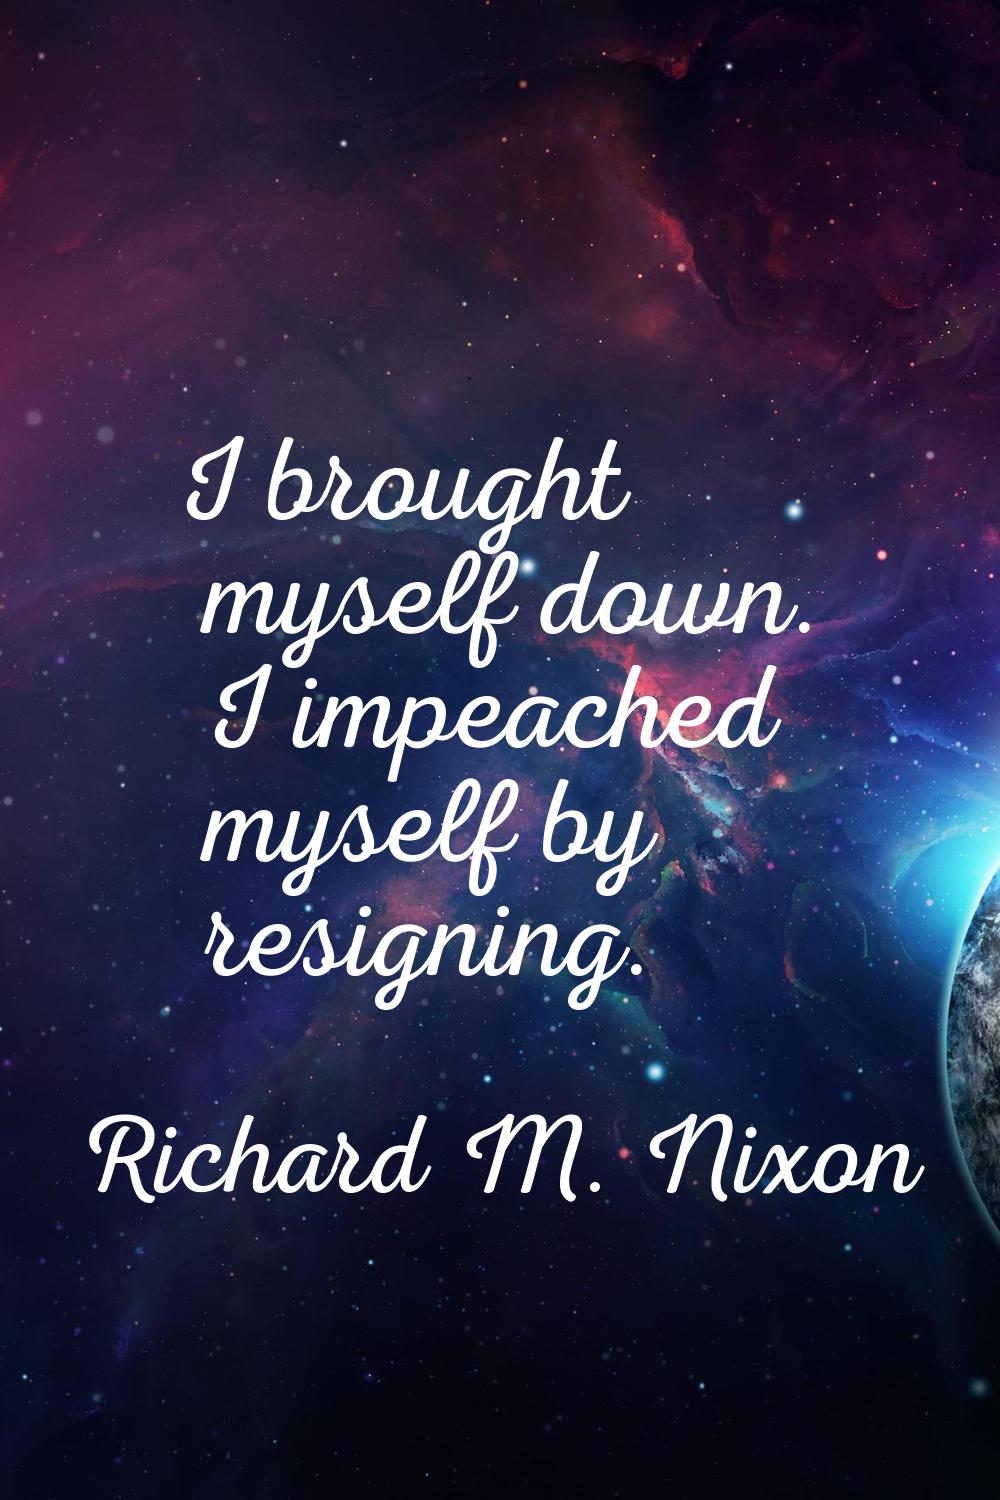 I brought myself down. I impeached myself by resigning.